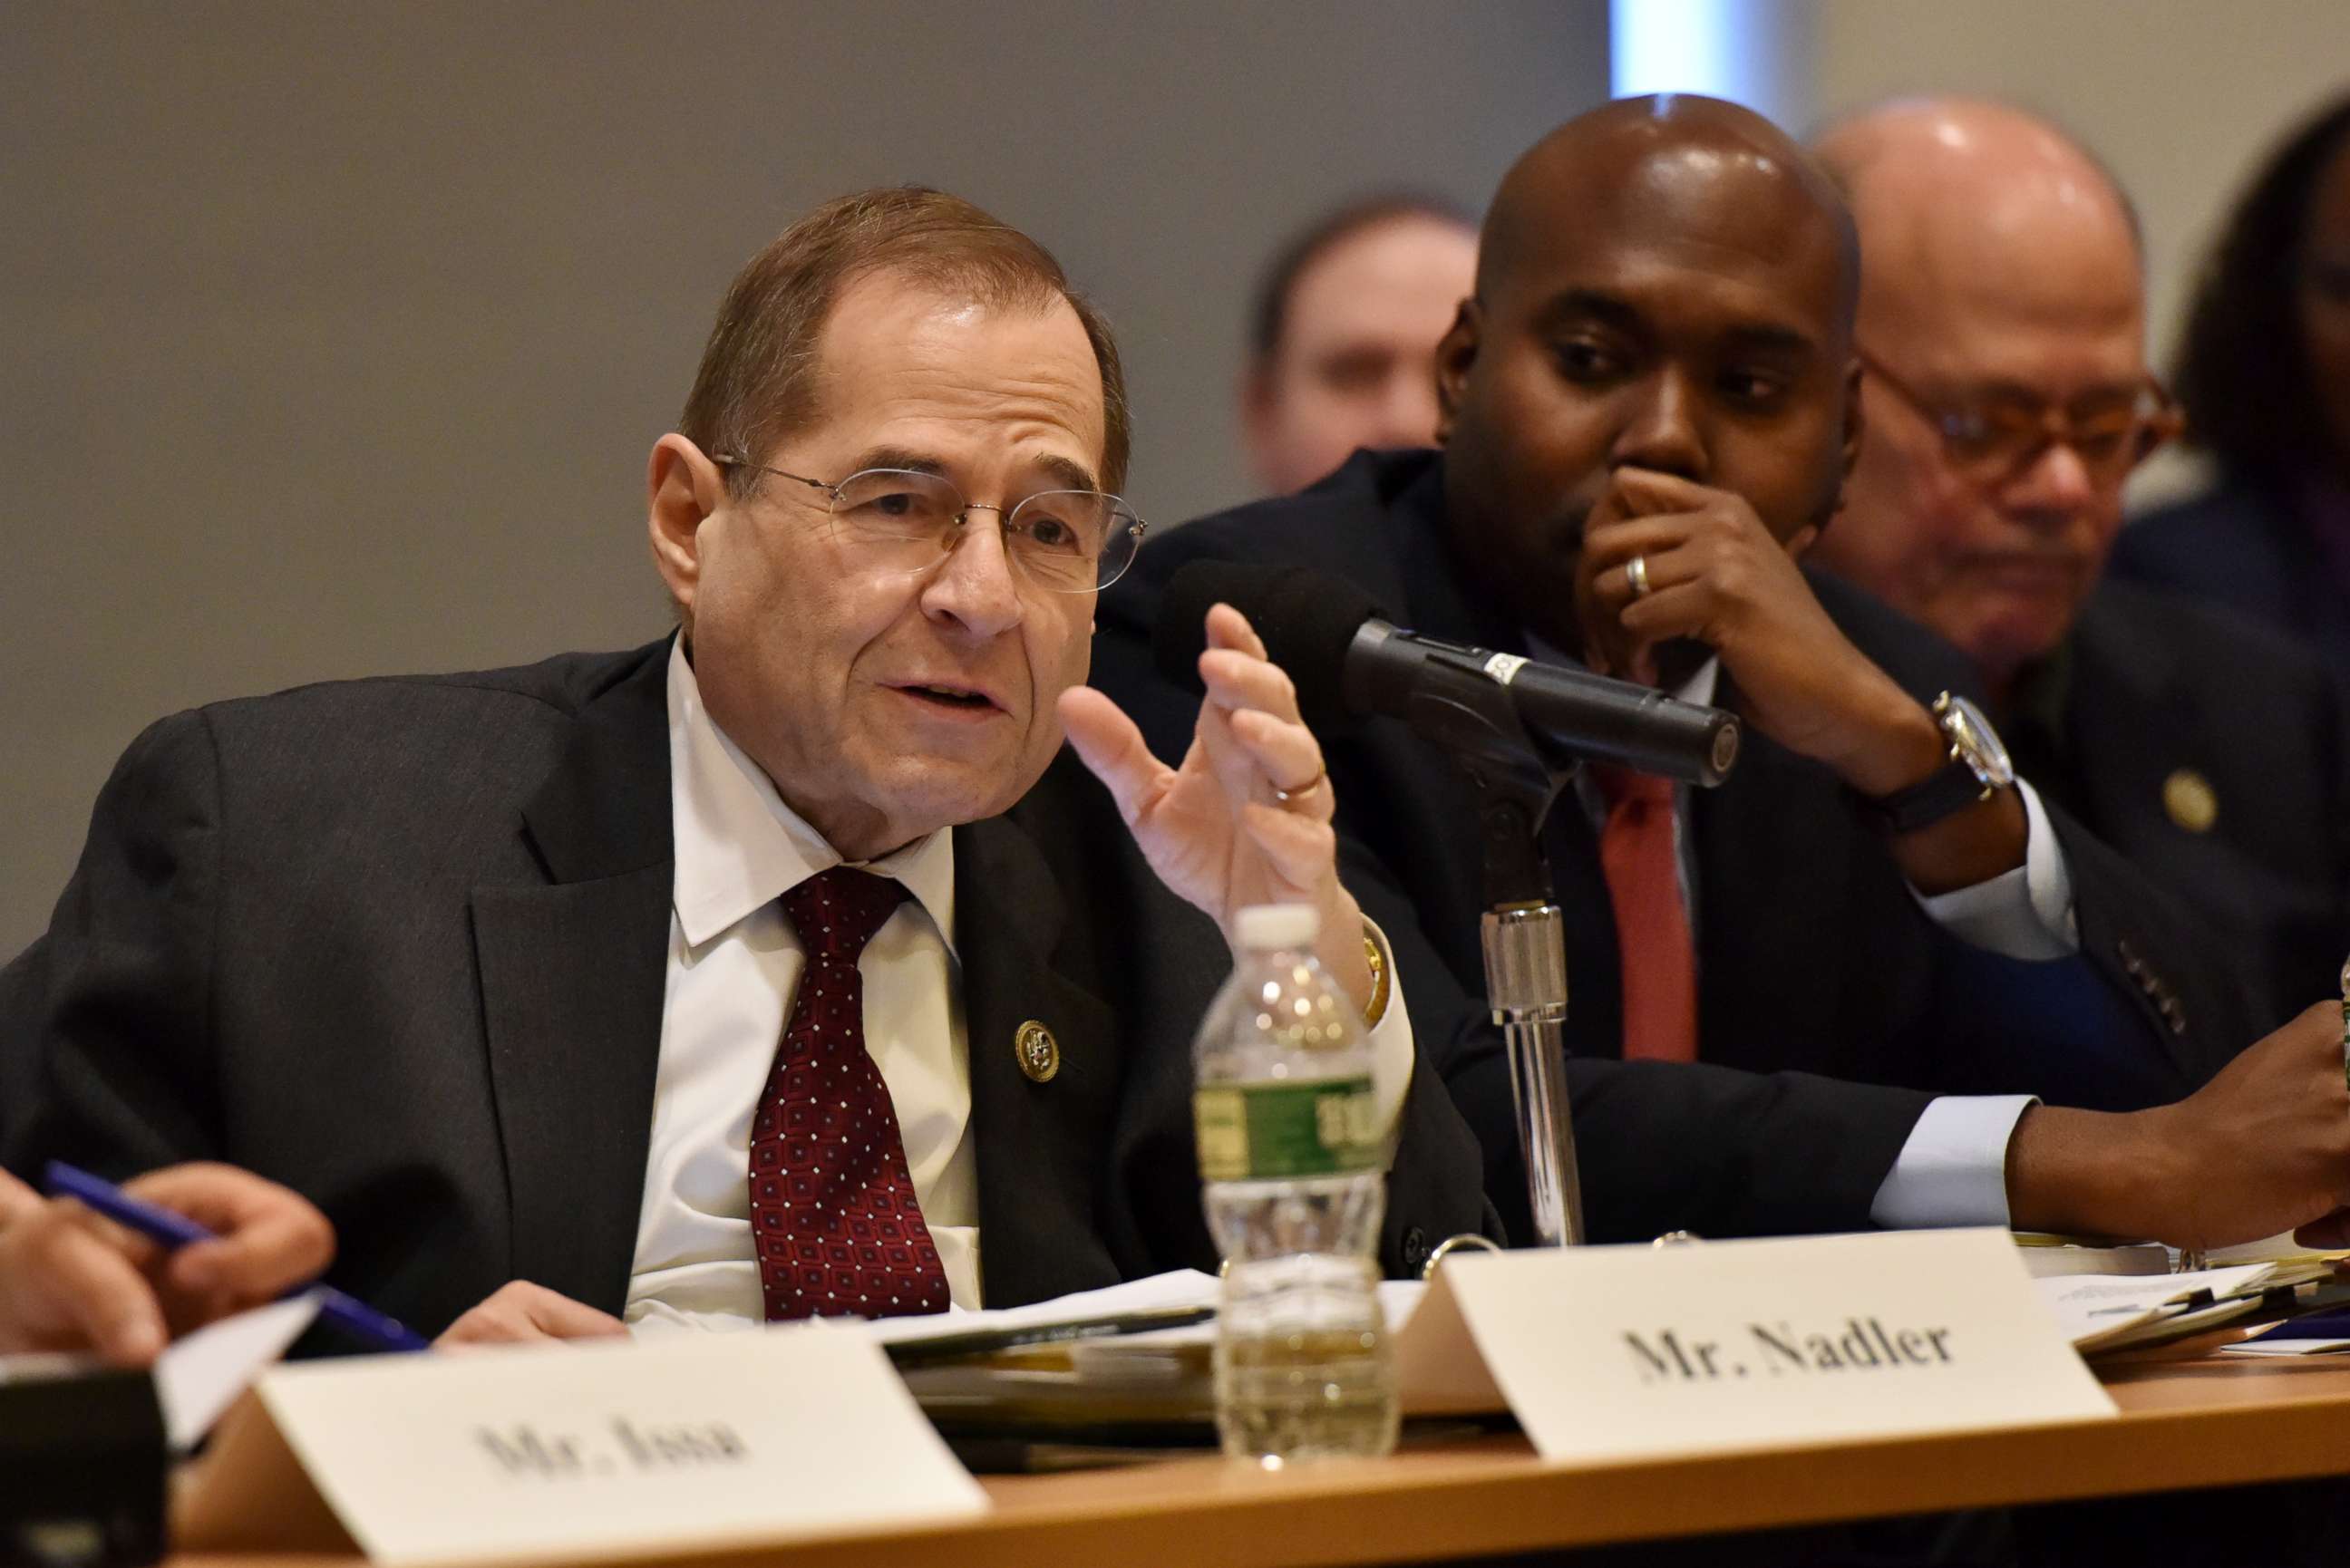 PHOTO: Jerrold Nadler participates in the 60th Annual GRAMMY Awards - House Judiciary Hearing at Fordham Law School, Jan. 26, 2018 in New York City.  